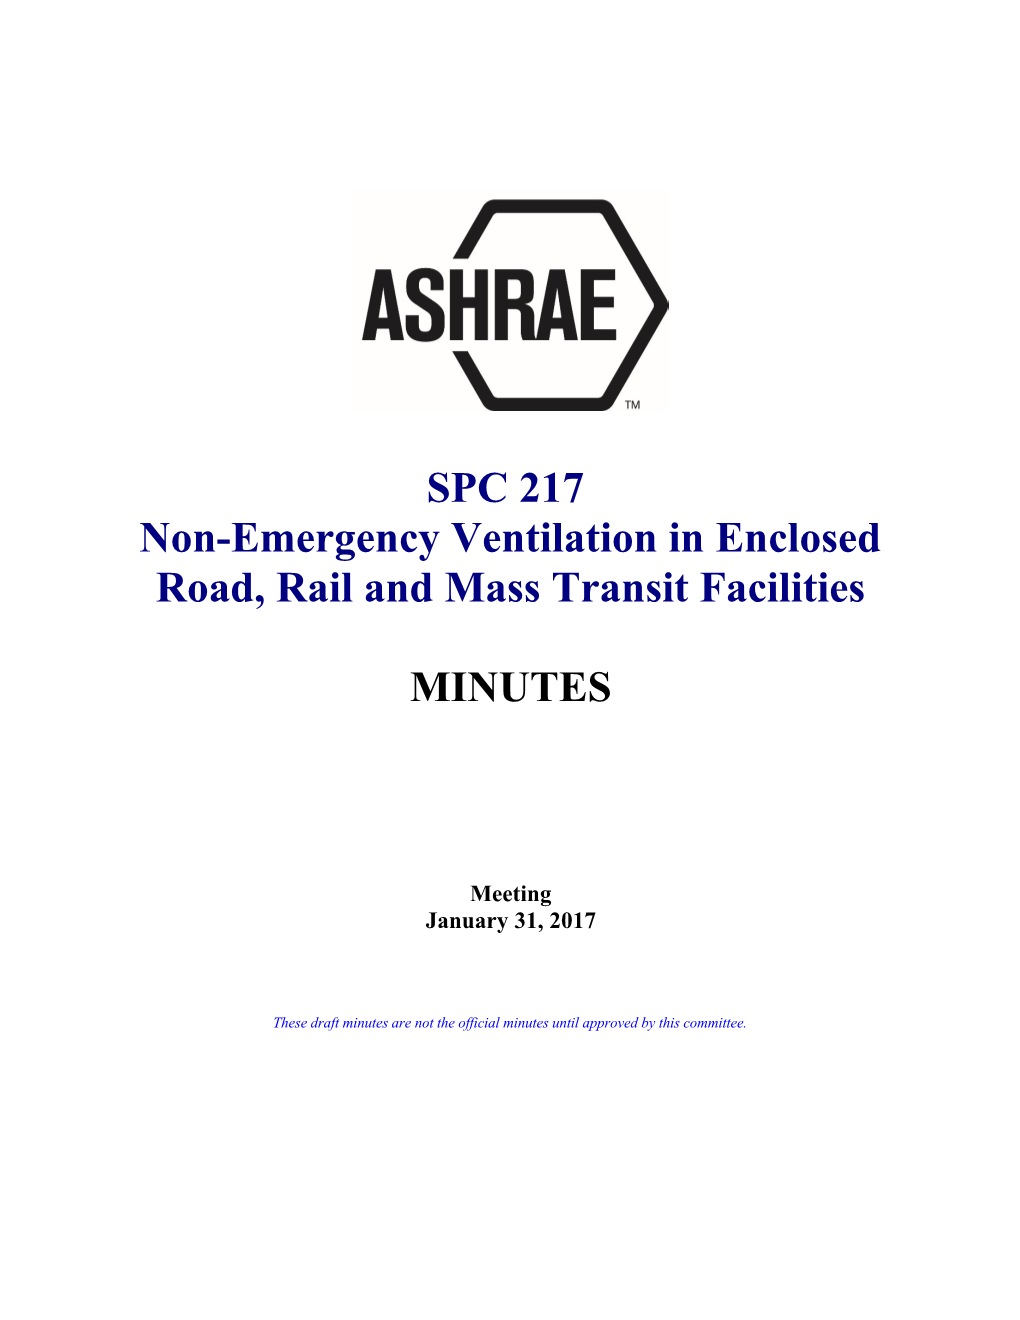 Non-Emergency Ventilation in Enclosed Road, Rail and Mass Transit Facilities